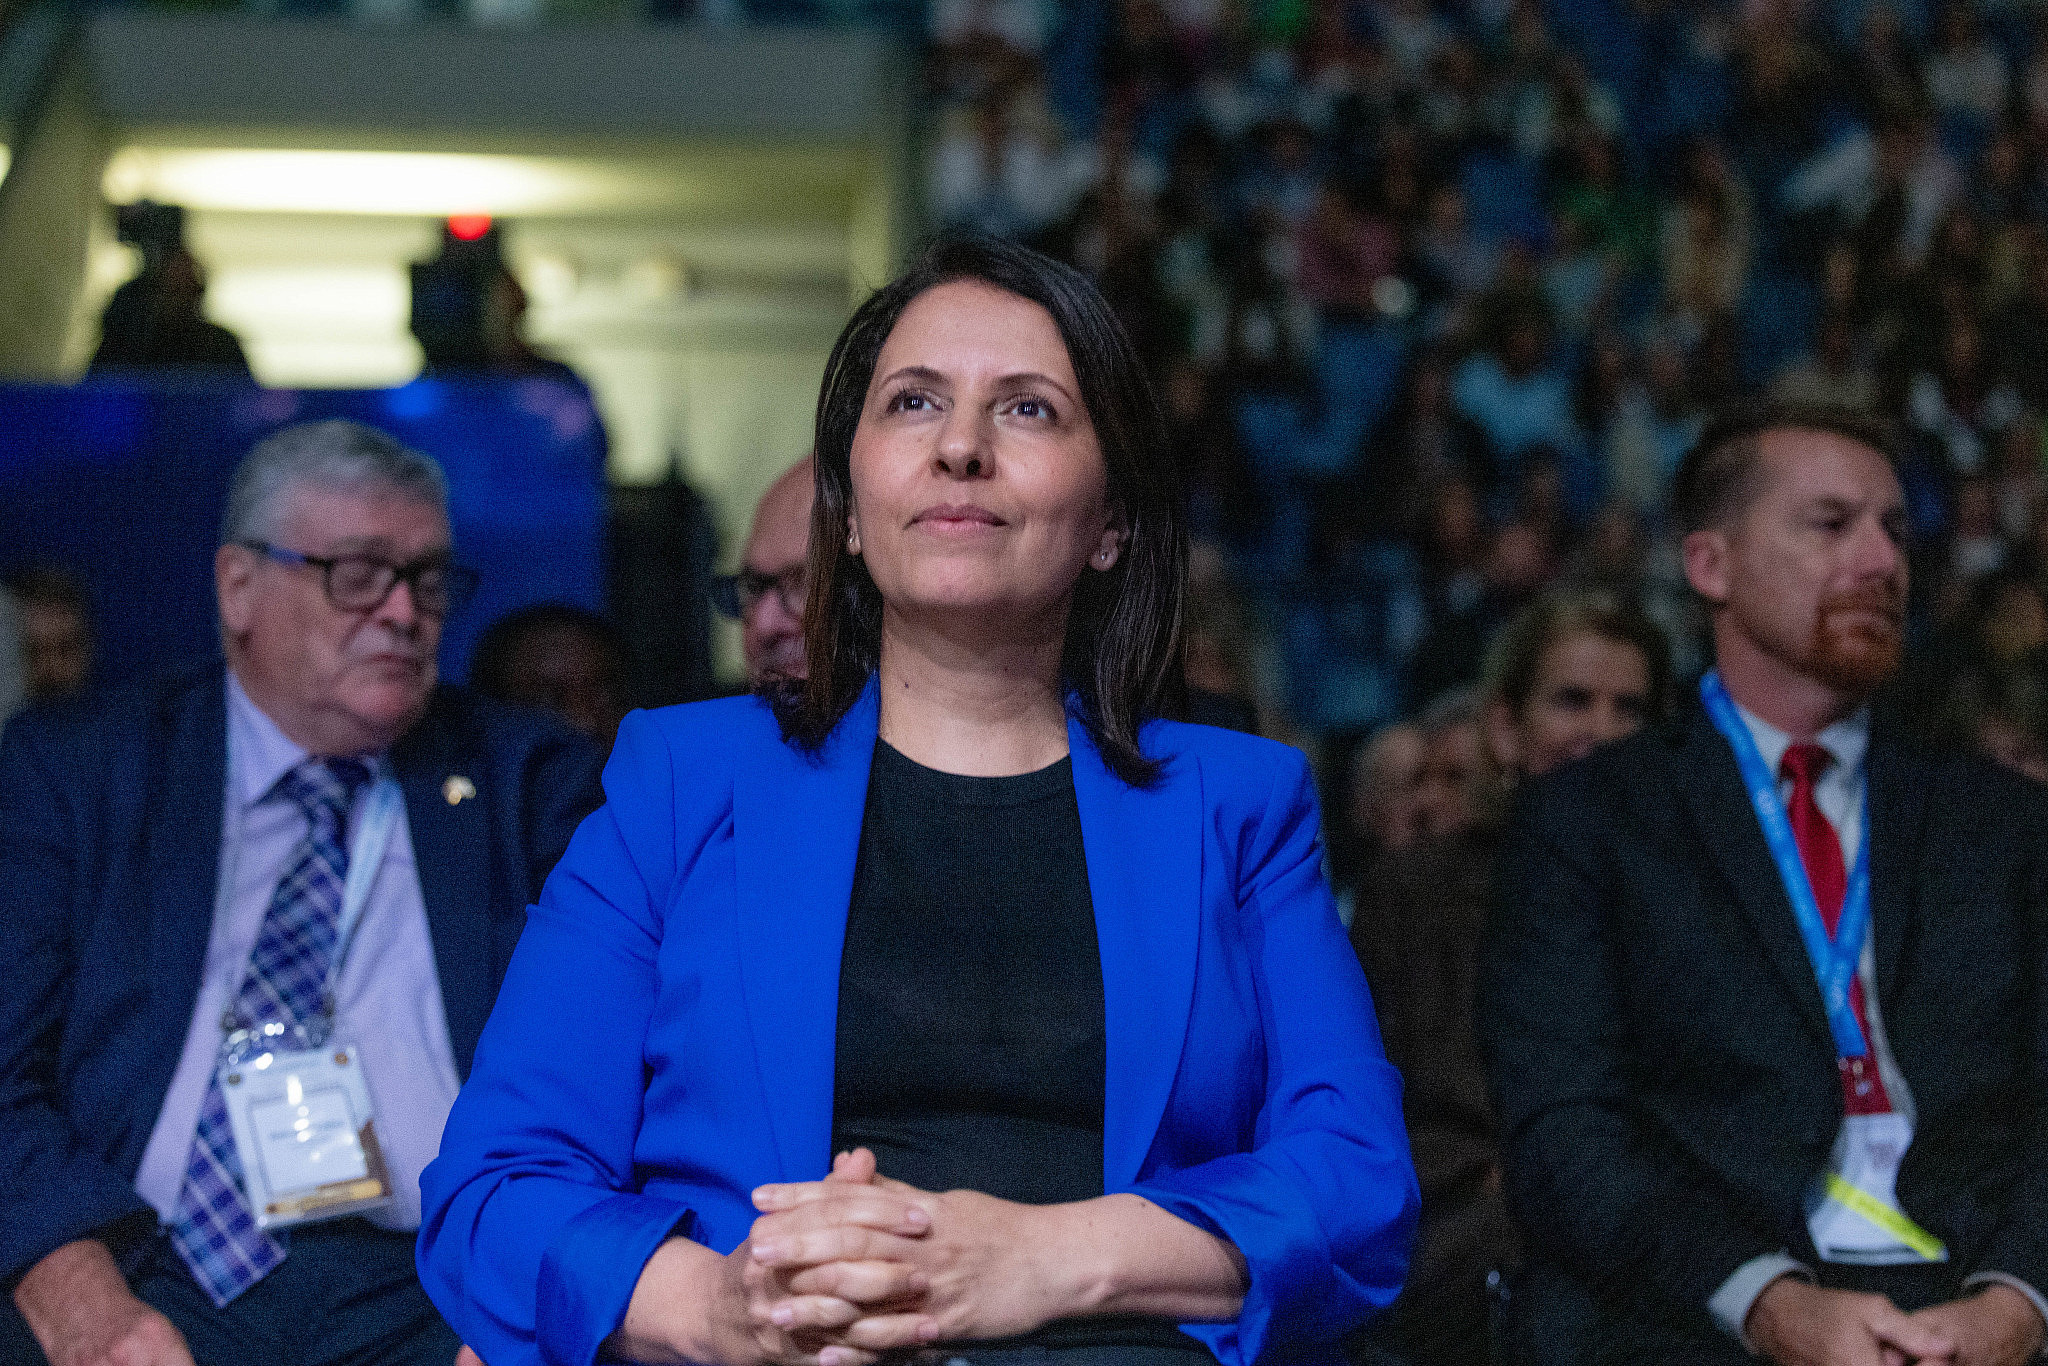 Israeli Intelligence Minister Gila Gamliel attends the Christian Feast of Tabernacles event organized by the Jerusalem Christian Embassy, held at the Arena stadium in Jerusalem, October 3, 2023. (Chaim Goldberg/Flash90)